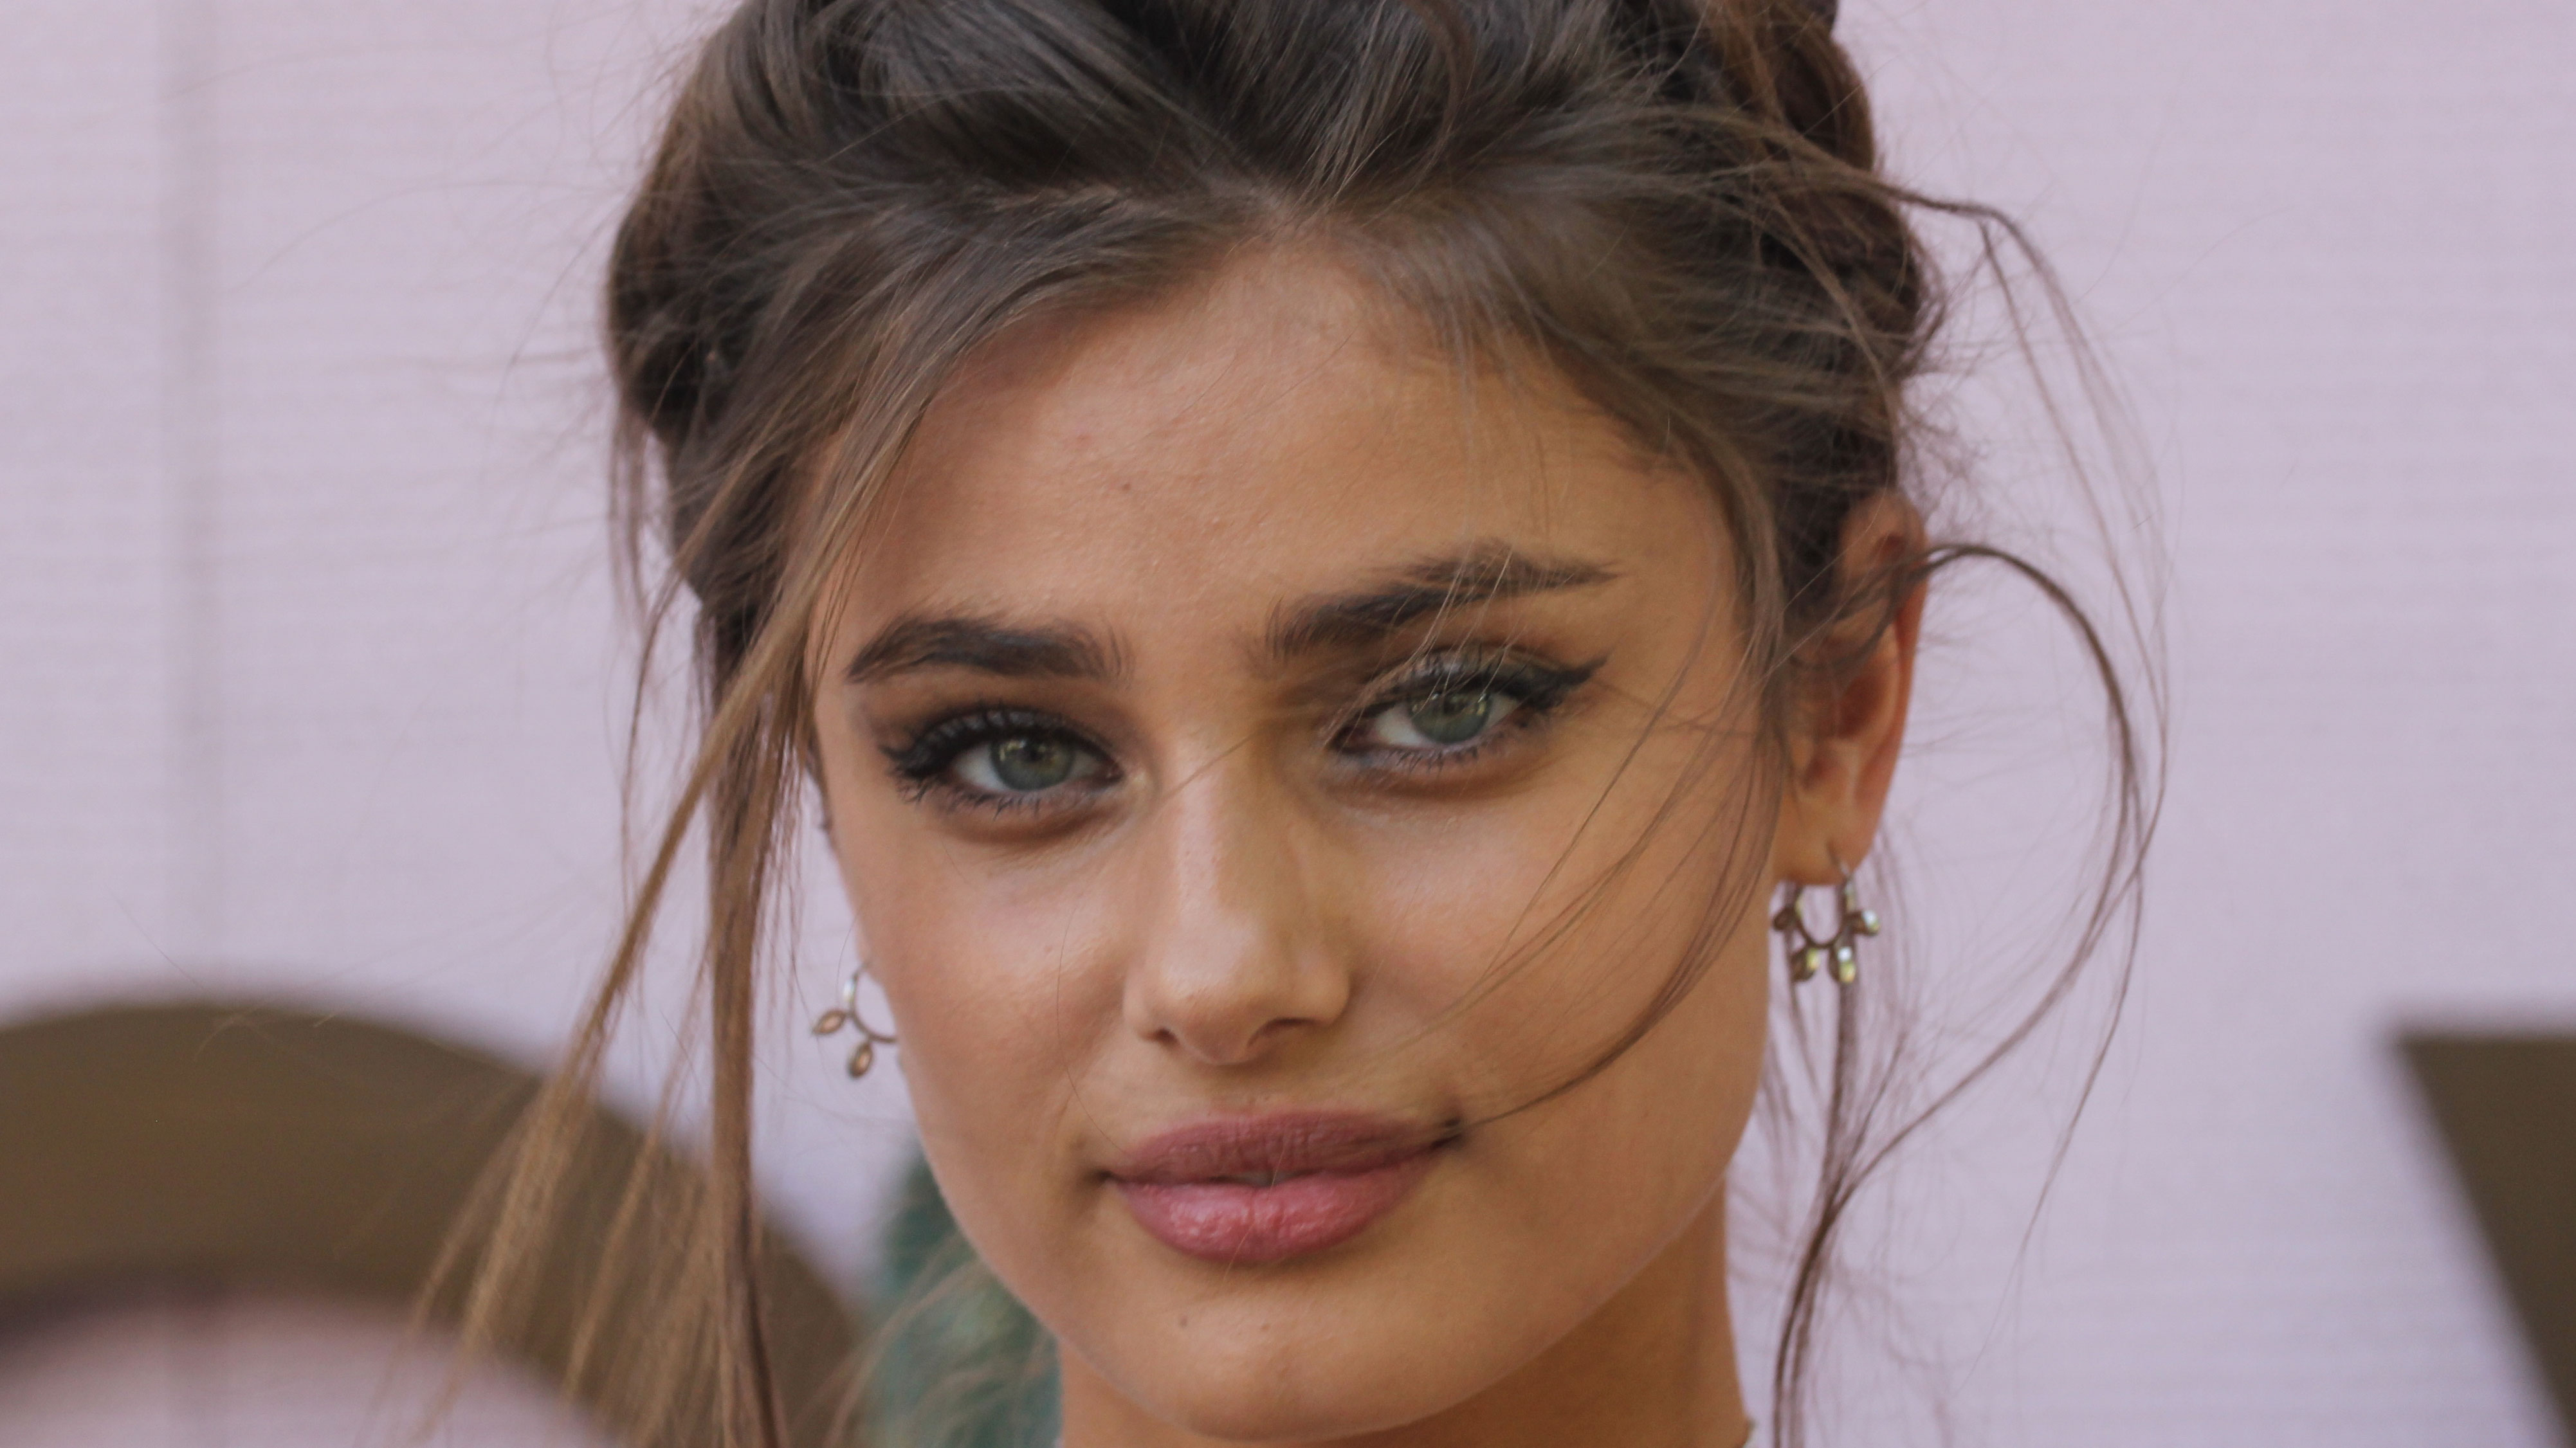 Even as a 3-year-old, Taylor Hill was already our bushy brow muse